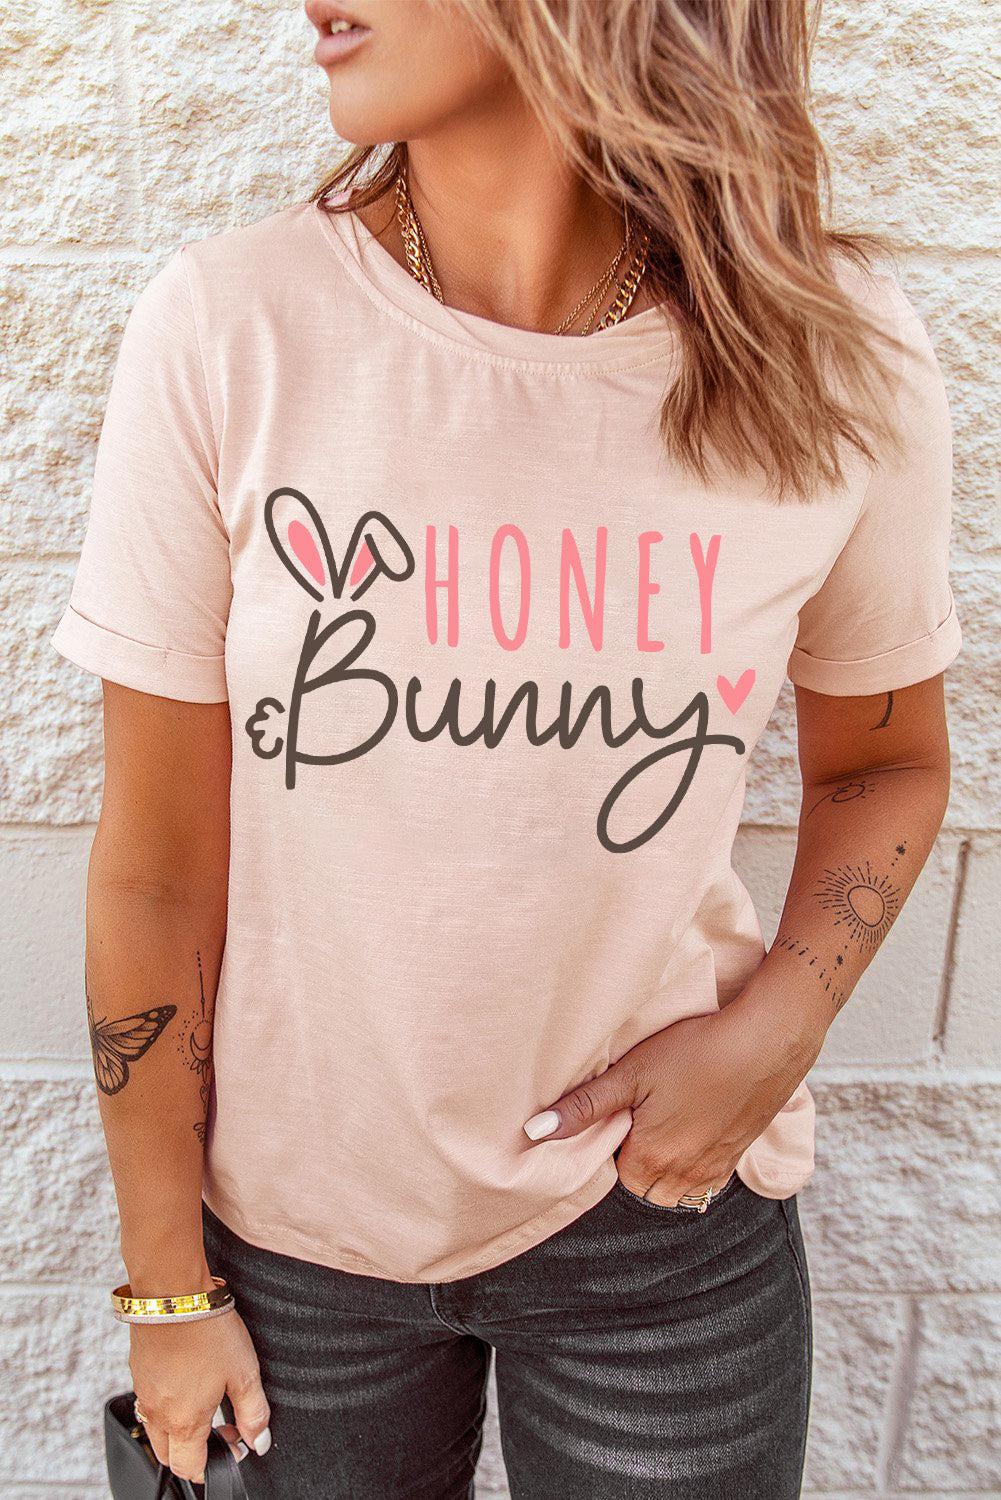 HONEY BUNNY Graphic Easter Tee BLUE ZONE PLANET